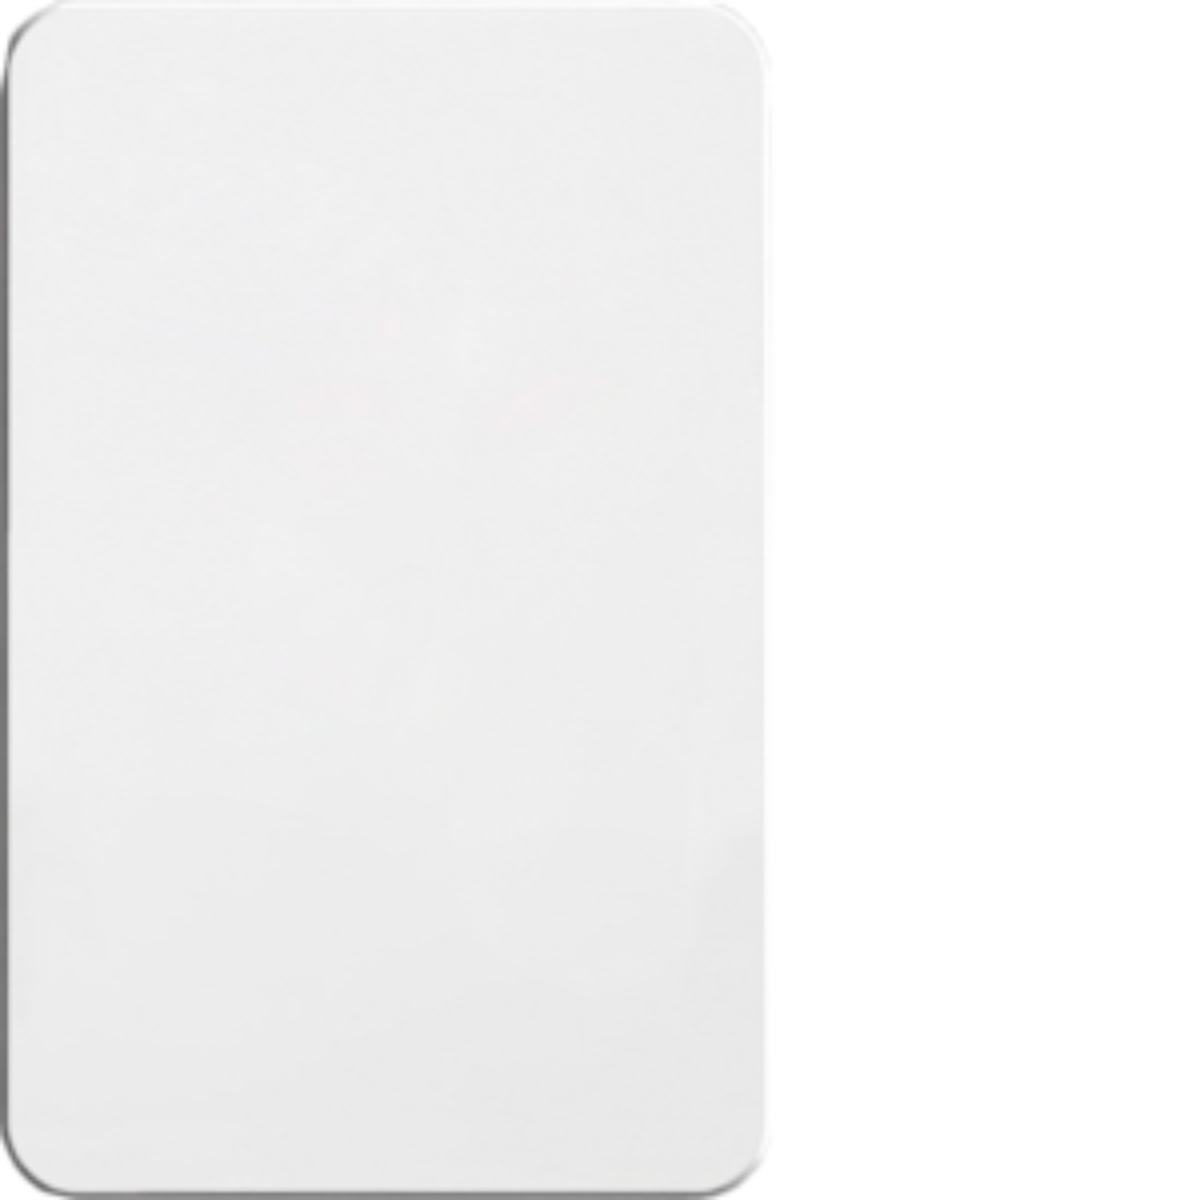 SILHOUETTE BLANK PLATE WHITE